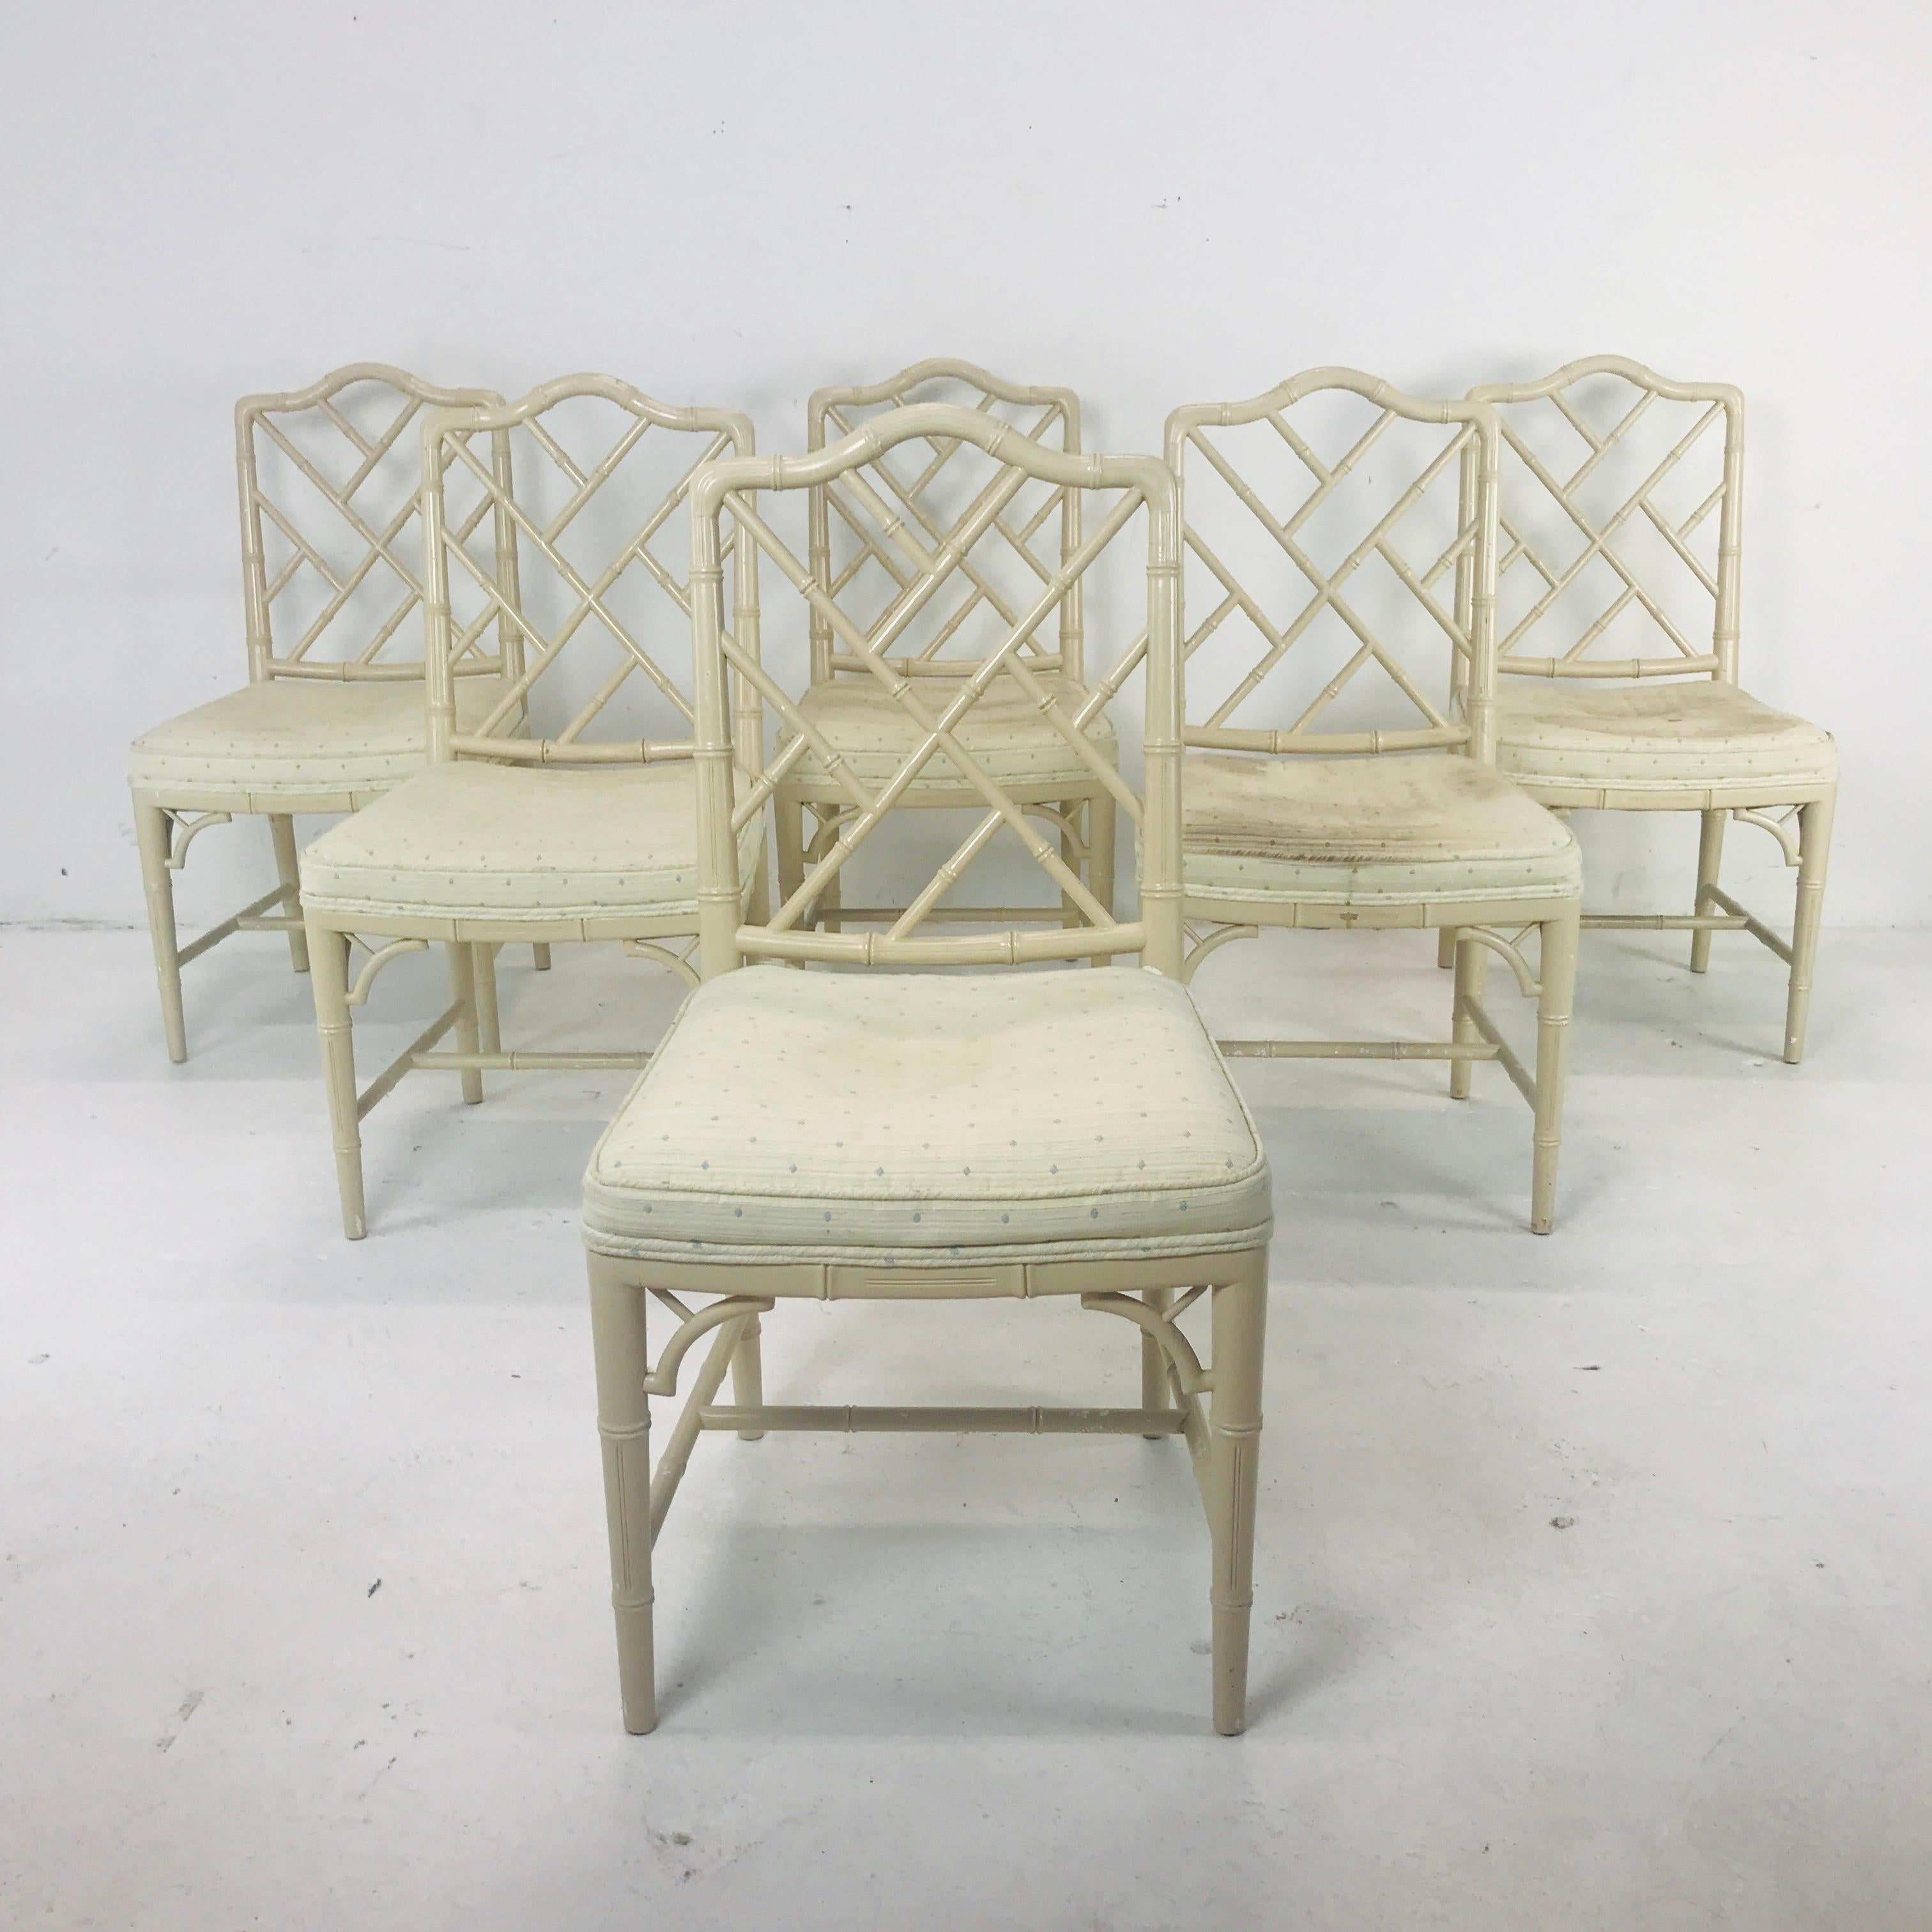 Set of 6 chinoiserie style cream color faux bamboo dining chairs with upholstered seats